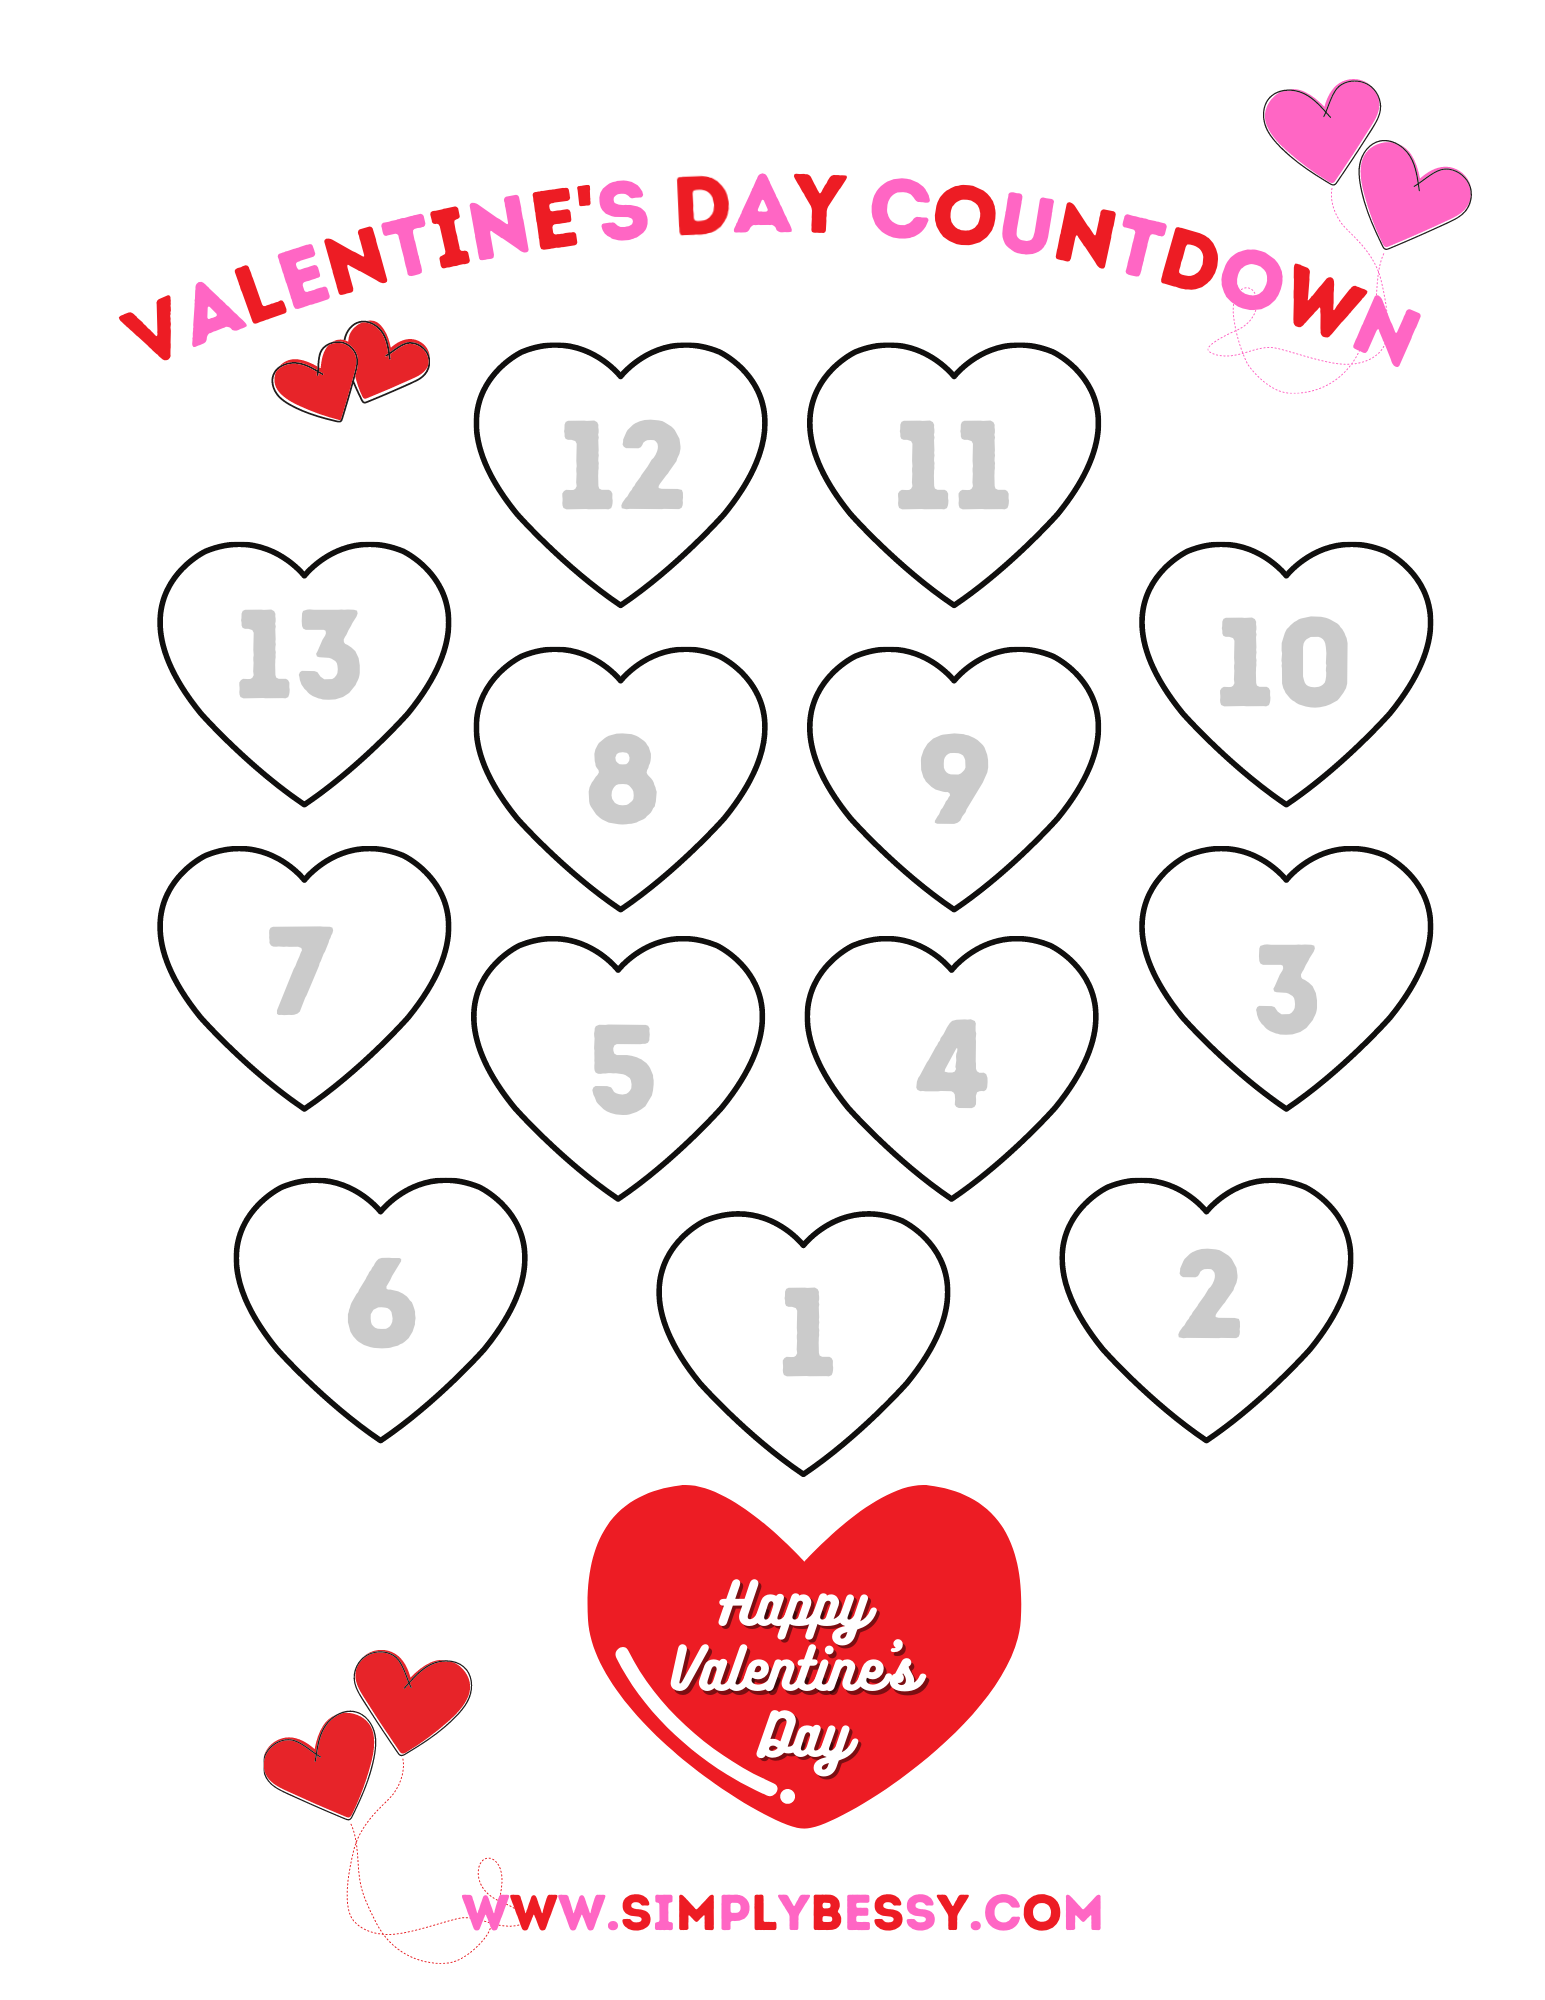 Valentine's Day Countdown Activity with Free Printable Made with HAPPY